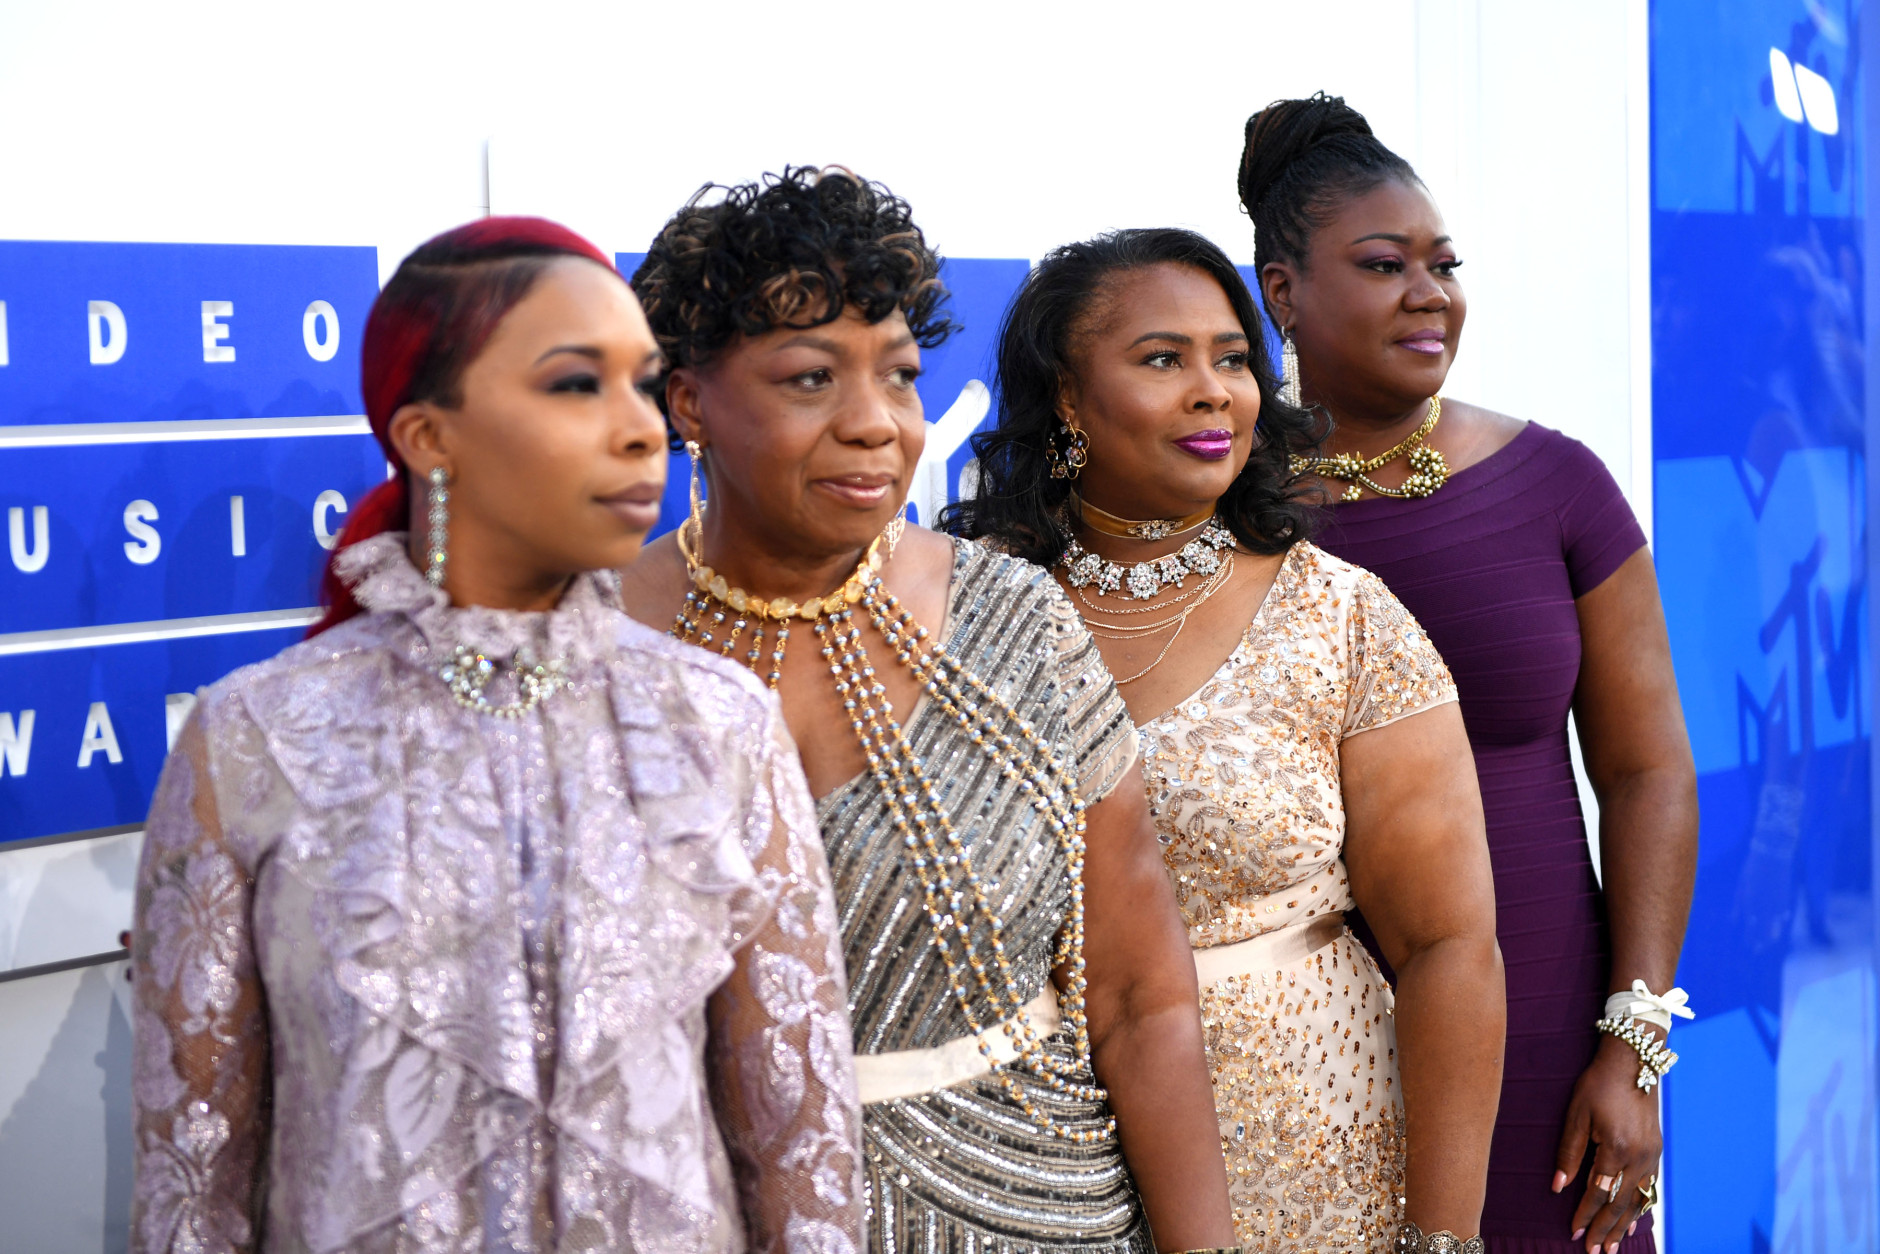 NEW YORK, NY - AUGUST 28:  Mothers of gun violence Lesley McFadden, Gwen Carr, Wanda Johnson and Sybrina Fulton attend the 2016 MTV Video Music Awards at Madison Square Garden on August 28, 2016 in New York City.  (Photo by Larry Busacca/Getty Images for MTV)